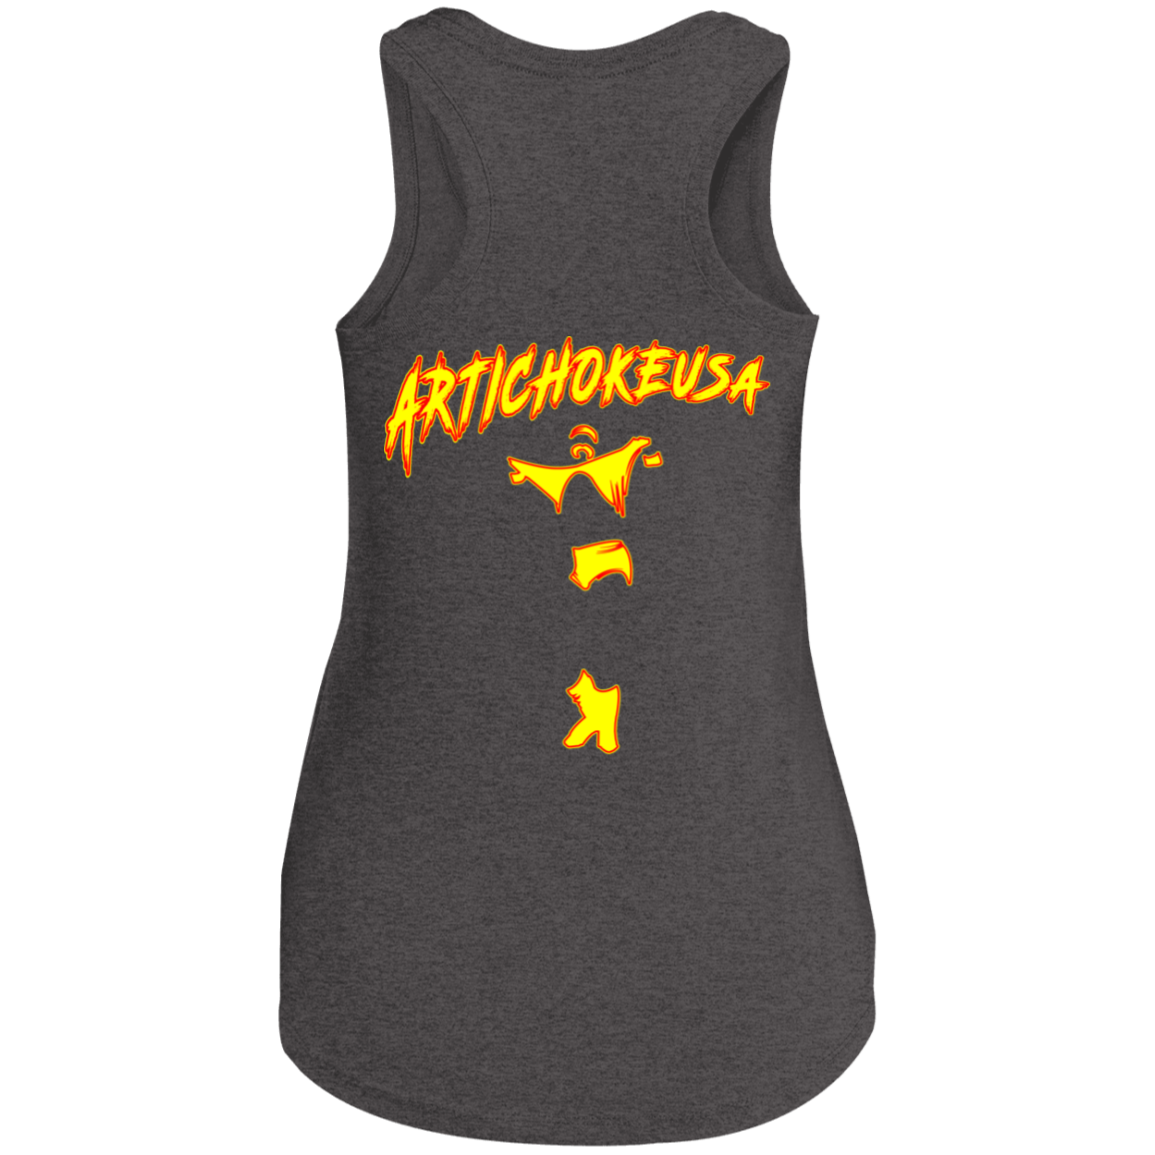 ArtichokeUSA Character and Font Design. Let’s Create Your Own Design Today. Fan Art. The Hulkster. Ladies' Tri Racerback Tank